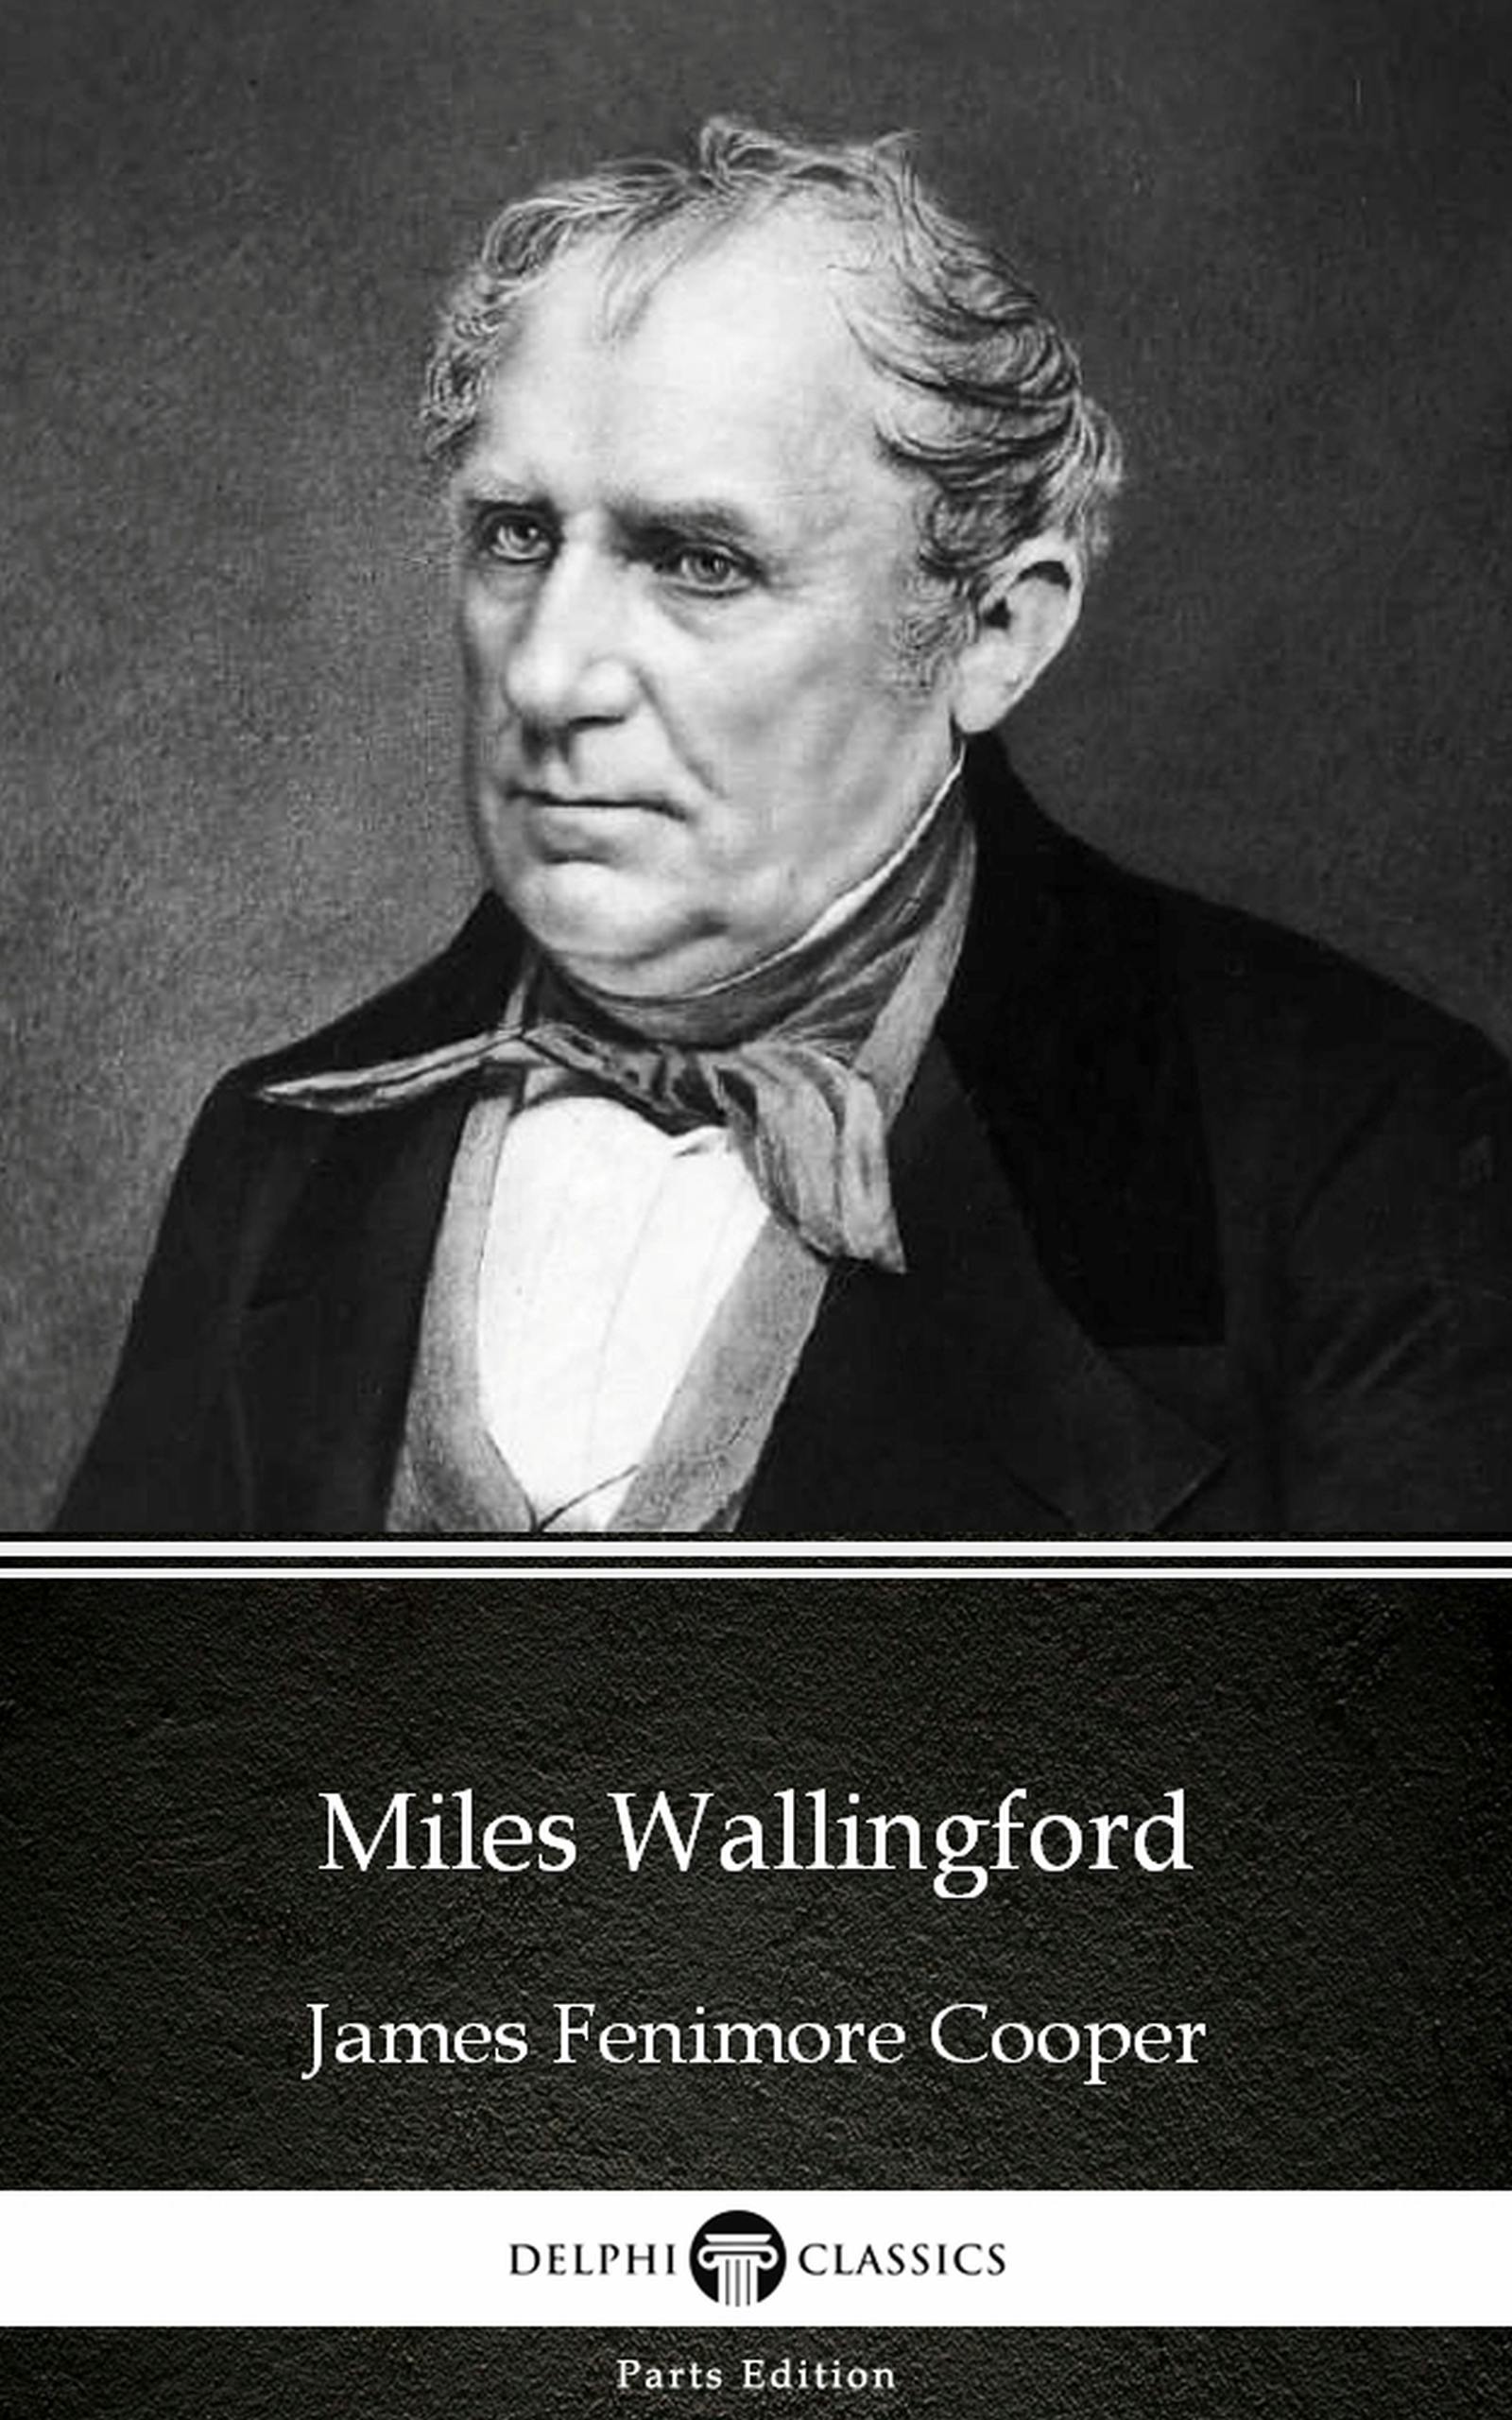 Miles Wallingford by James Fenimore Cooper - Delphi Classics (Illustrated) - James Fenimore Cooper